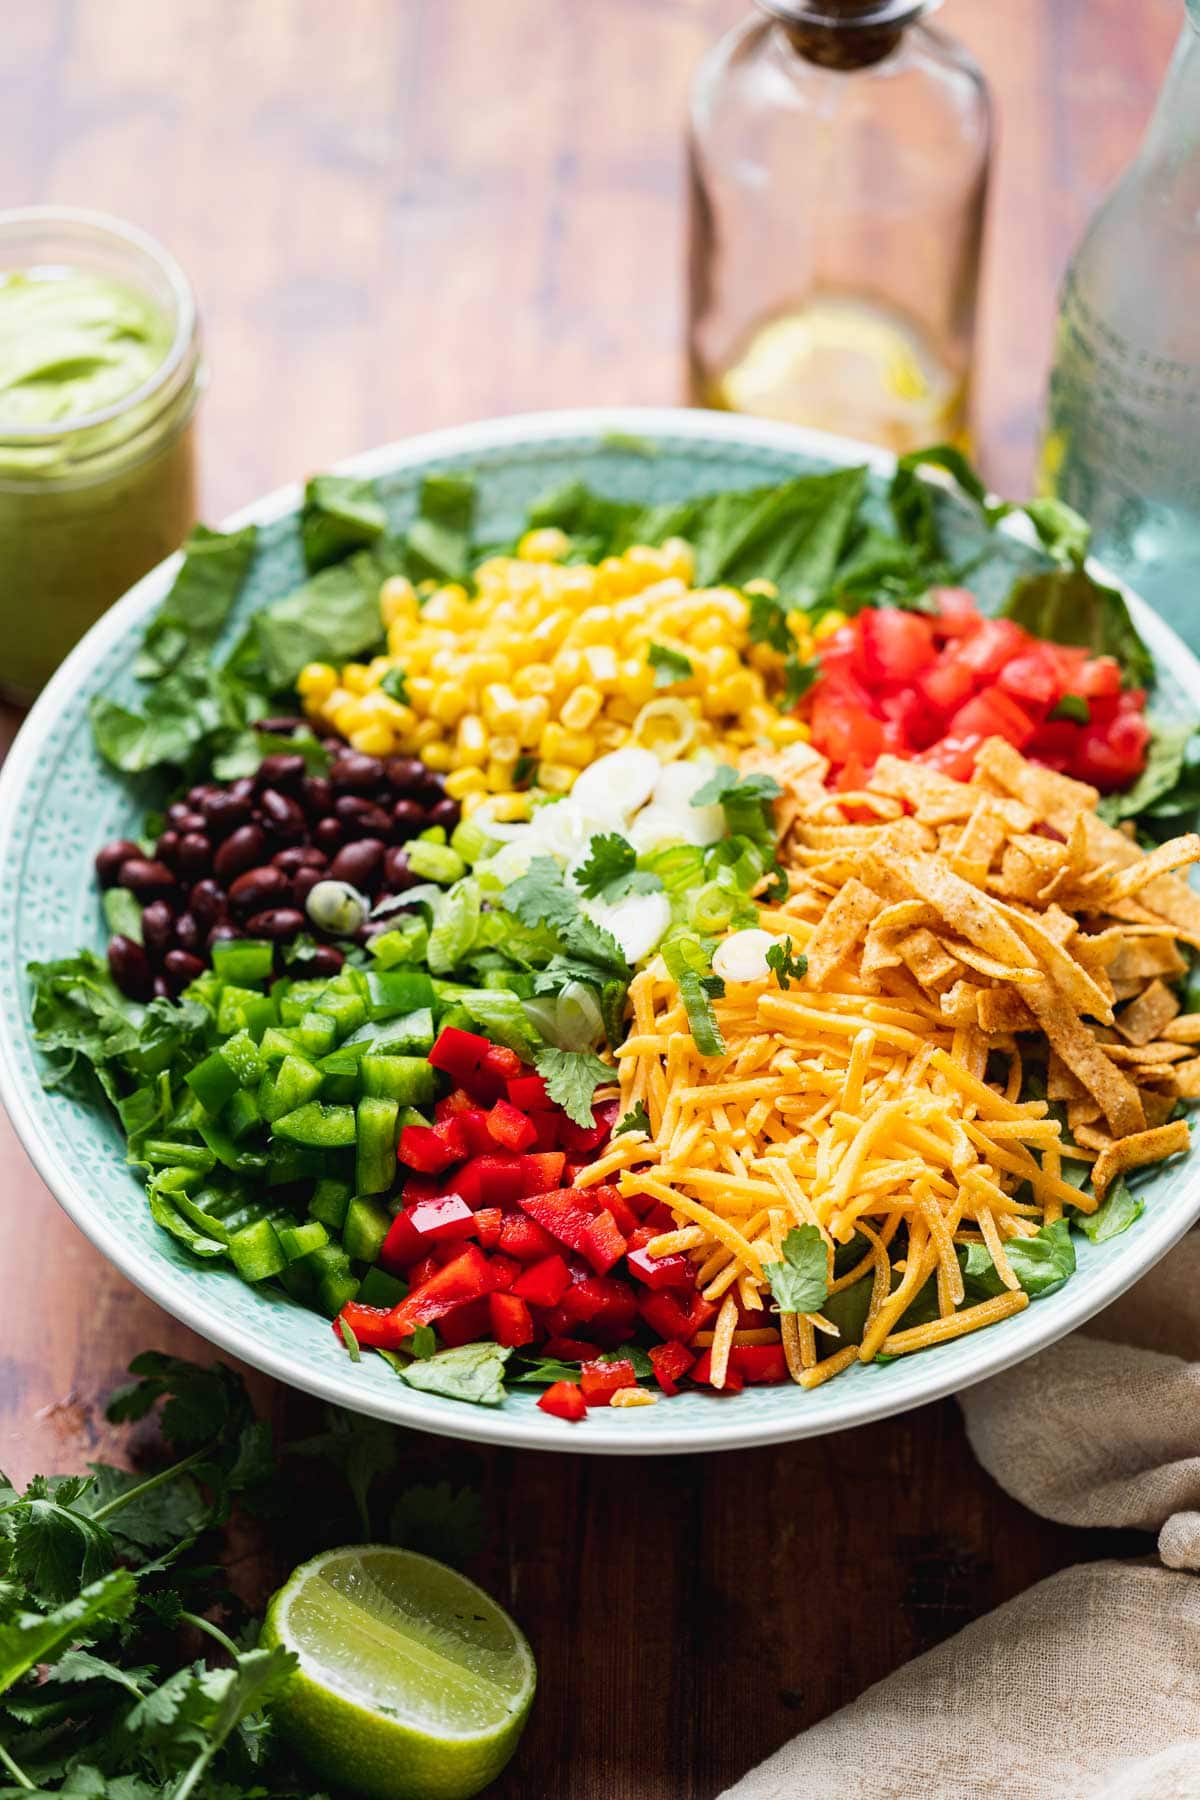 Southwest Salad all salad ingredients in bowl before tossing, dressing in jar off to side